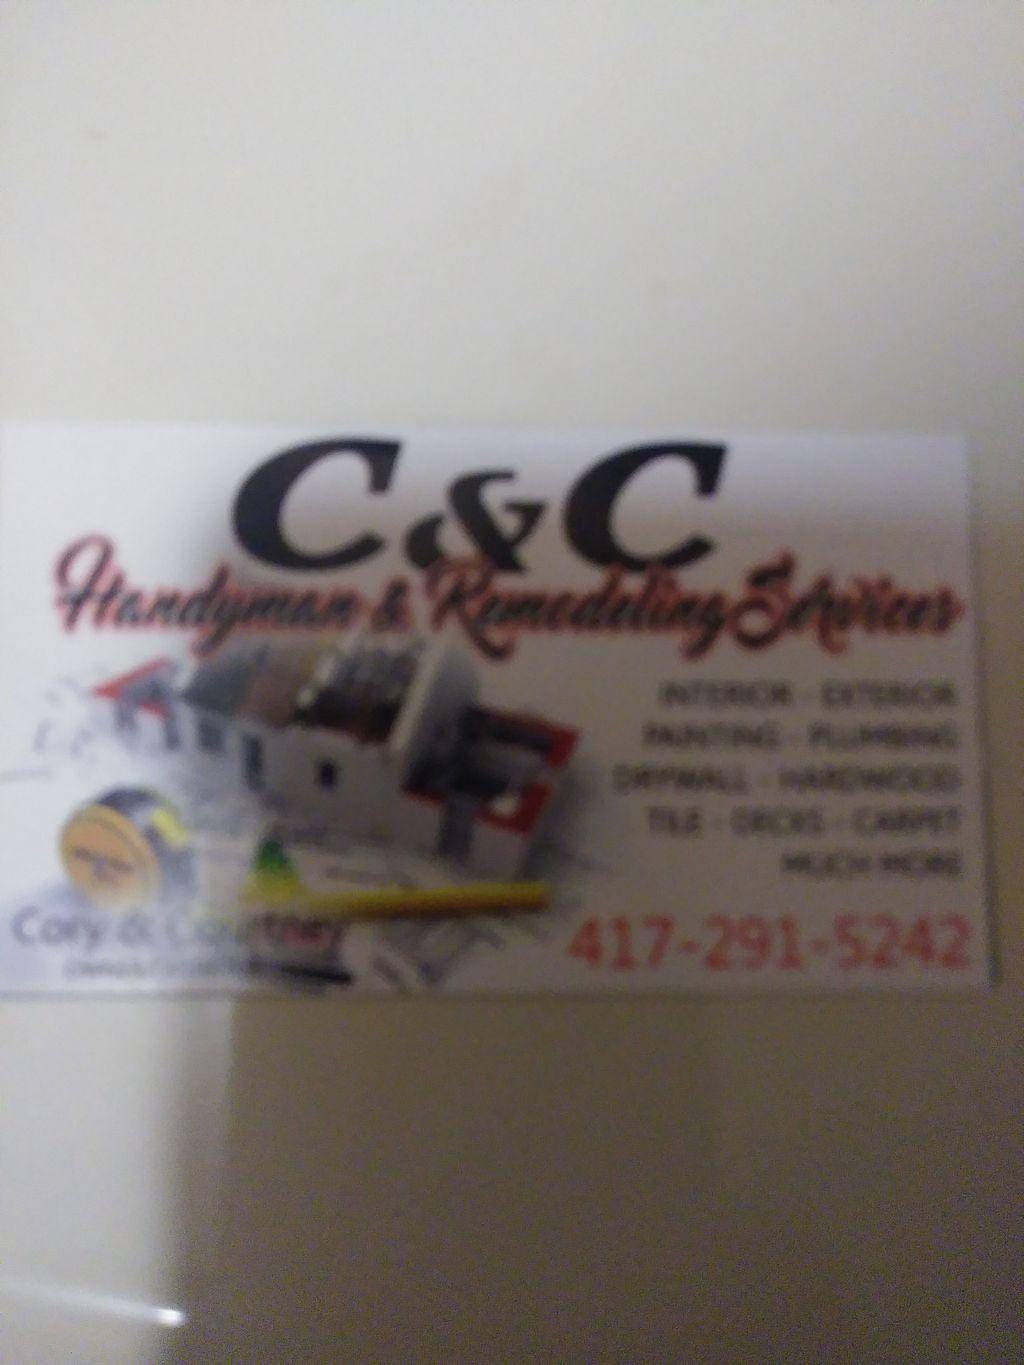 C&C Handyman and Remodeling